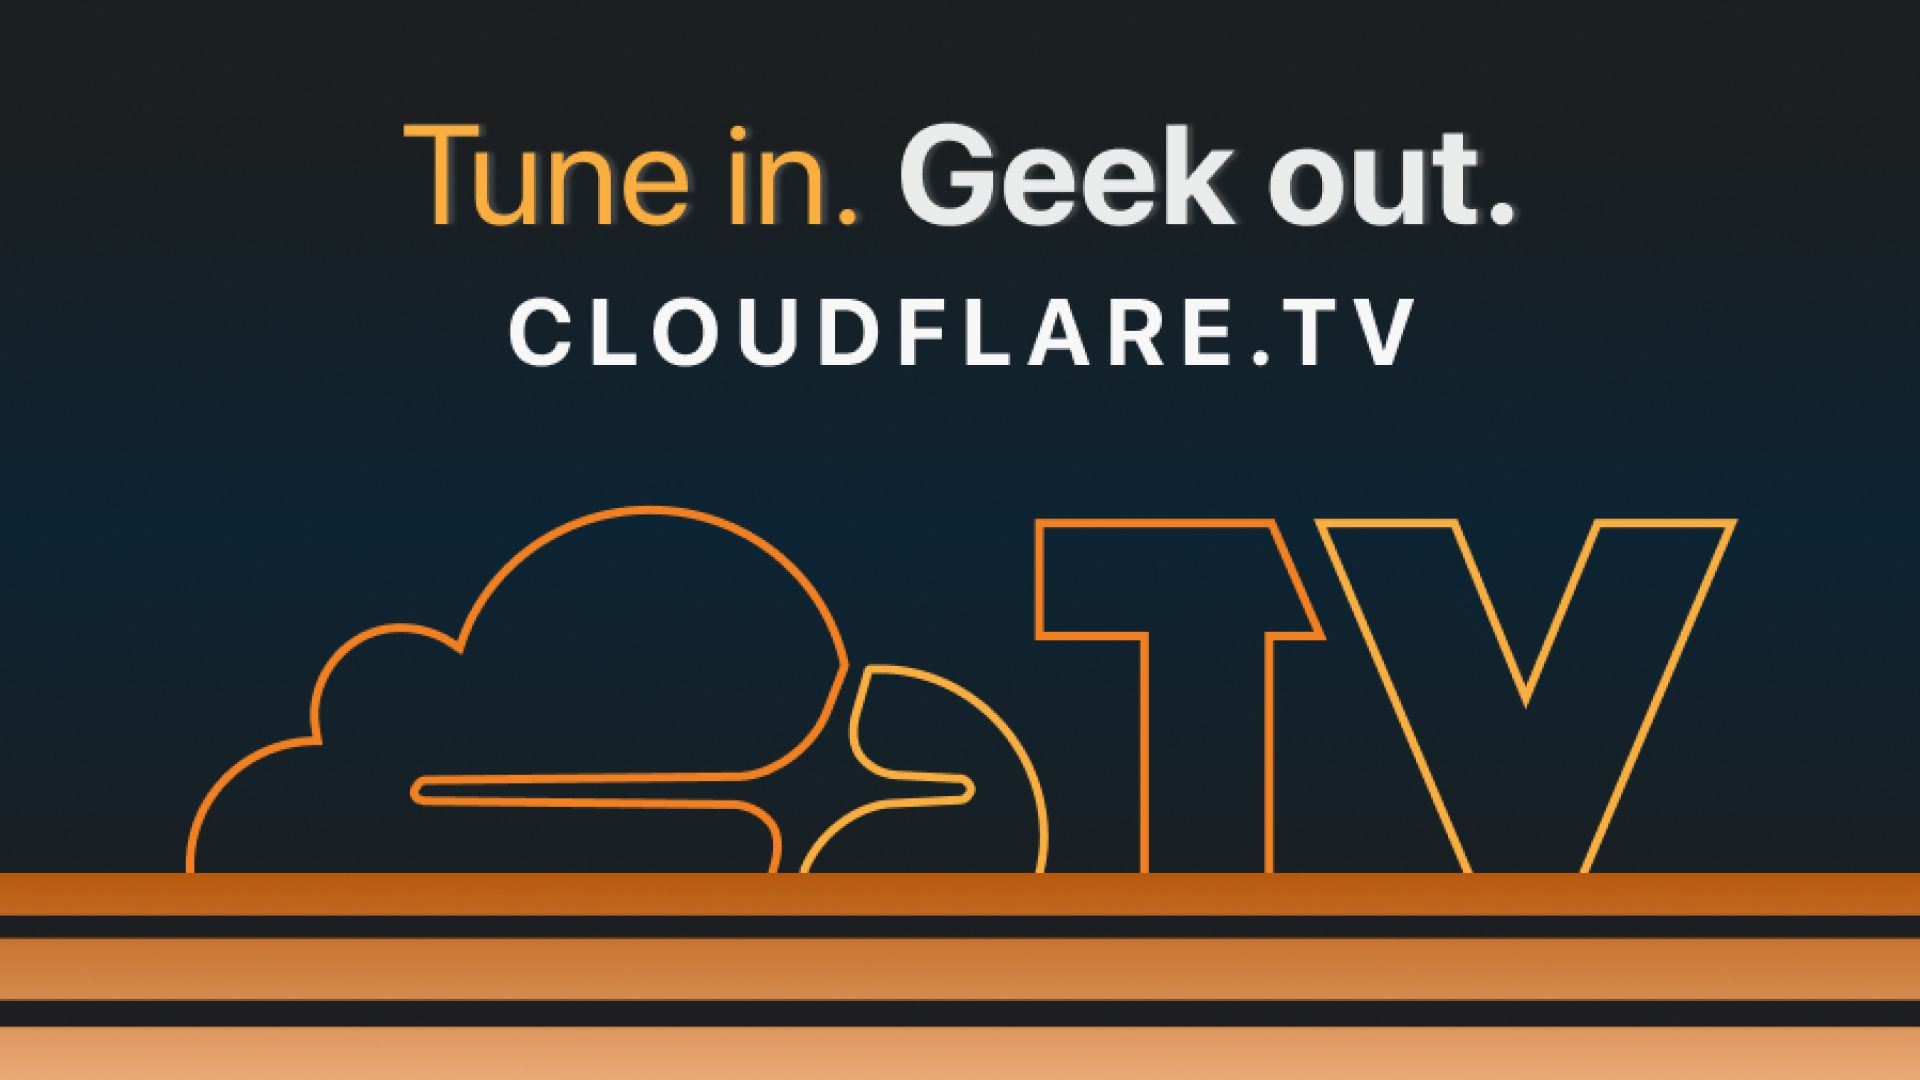 Cloudflare TV Live